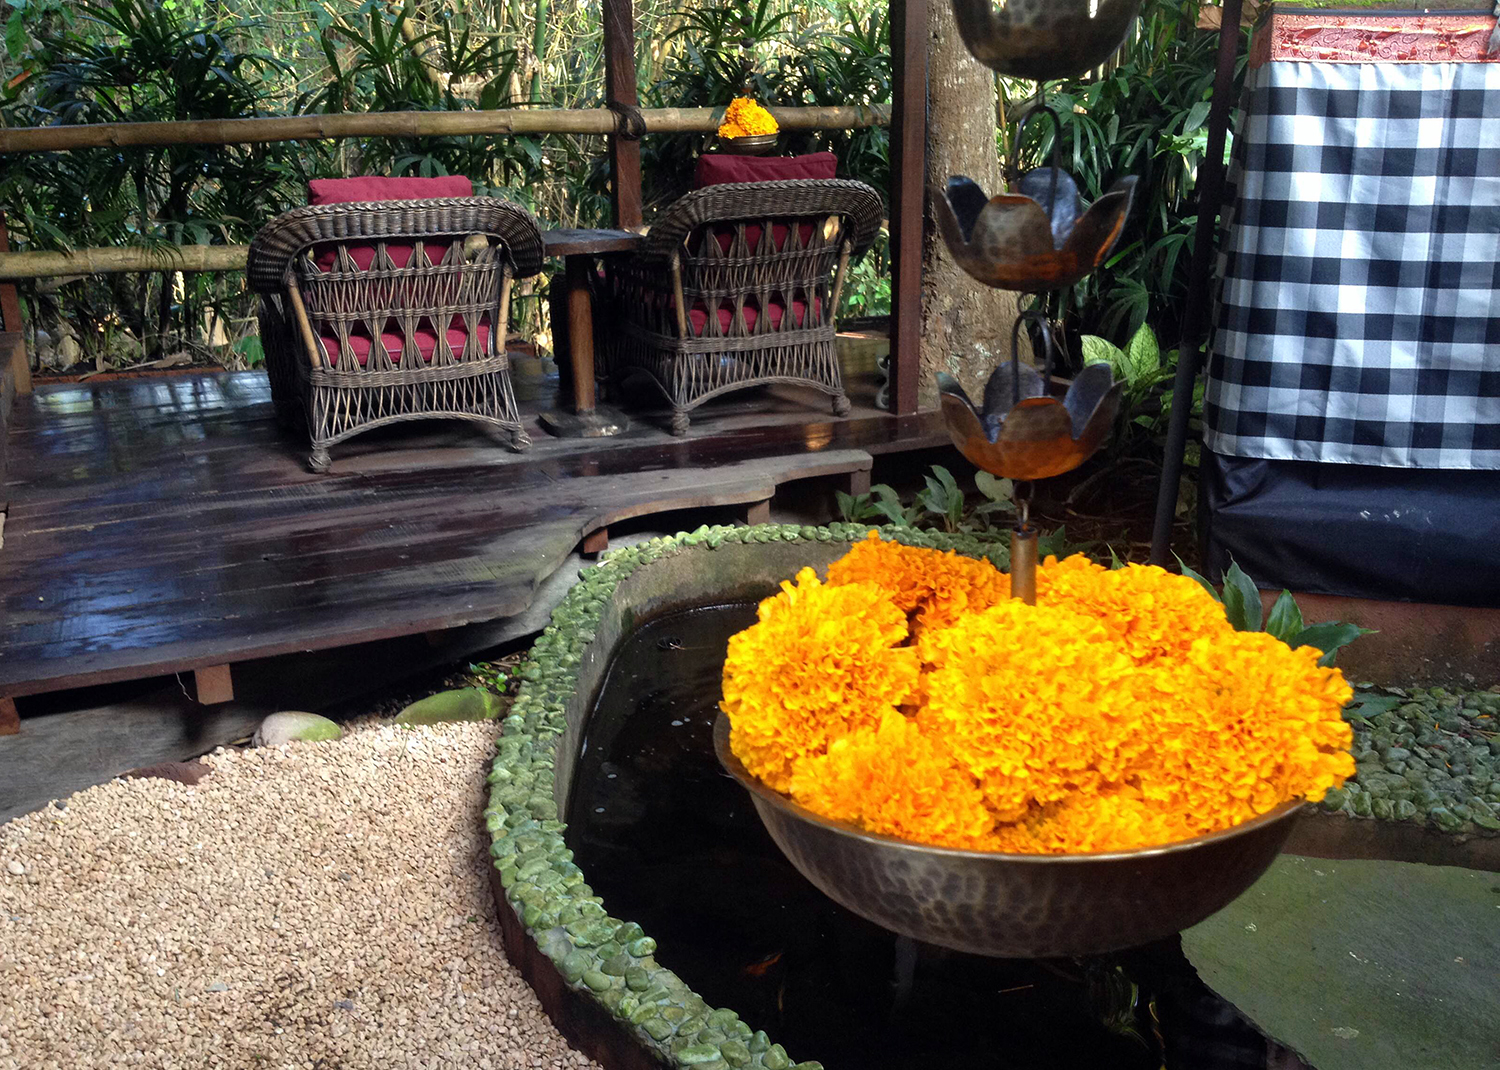 Getting centred in the soothing setting of Kush spa in Ubud, Bali. Image by Samantha Chalker / Lonely Planet